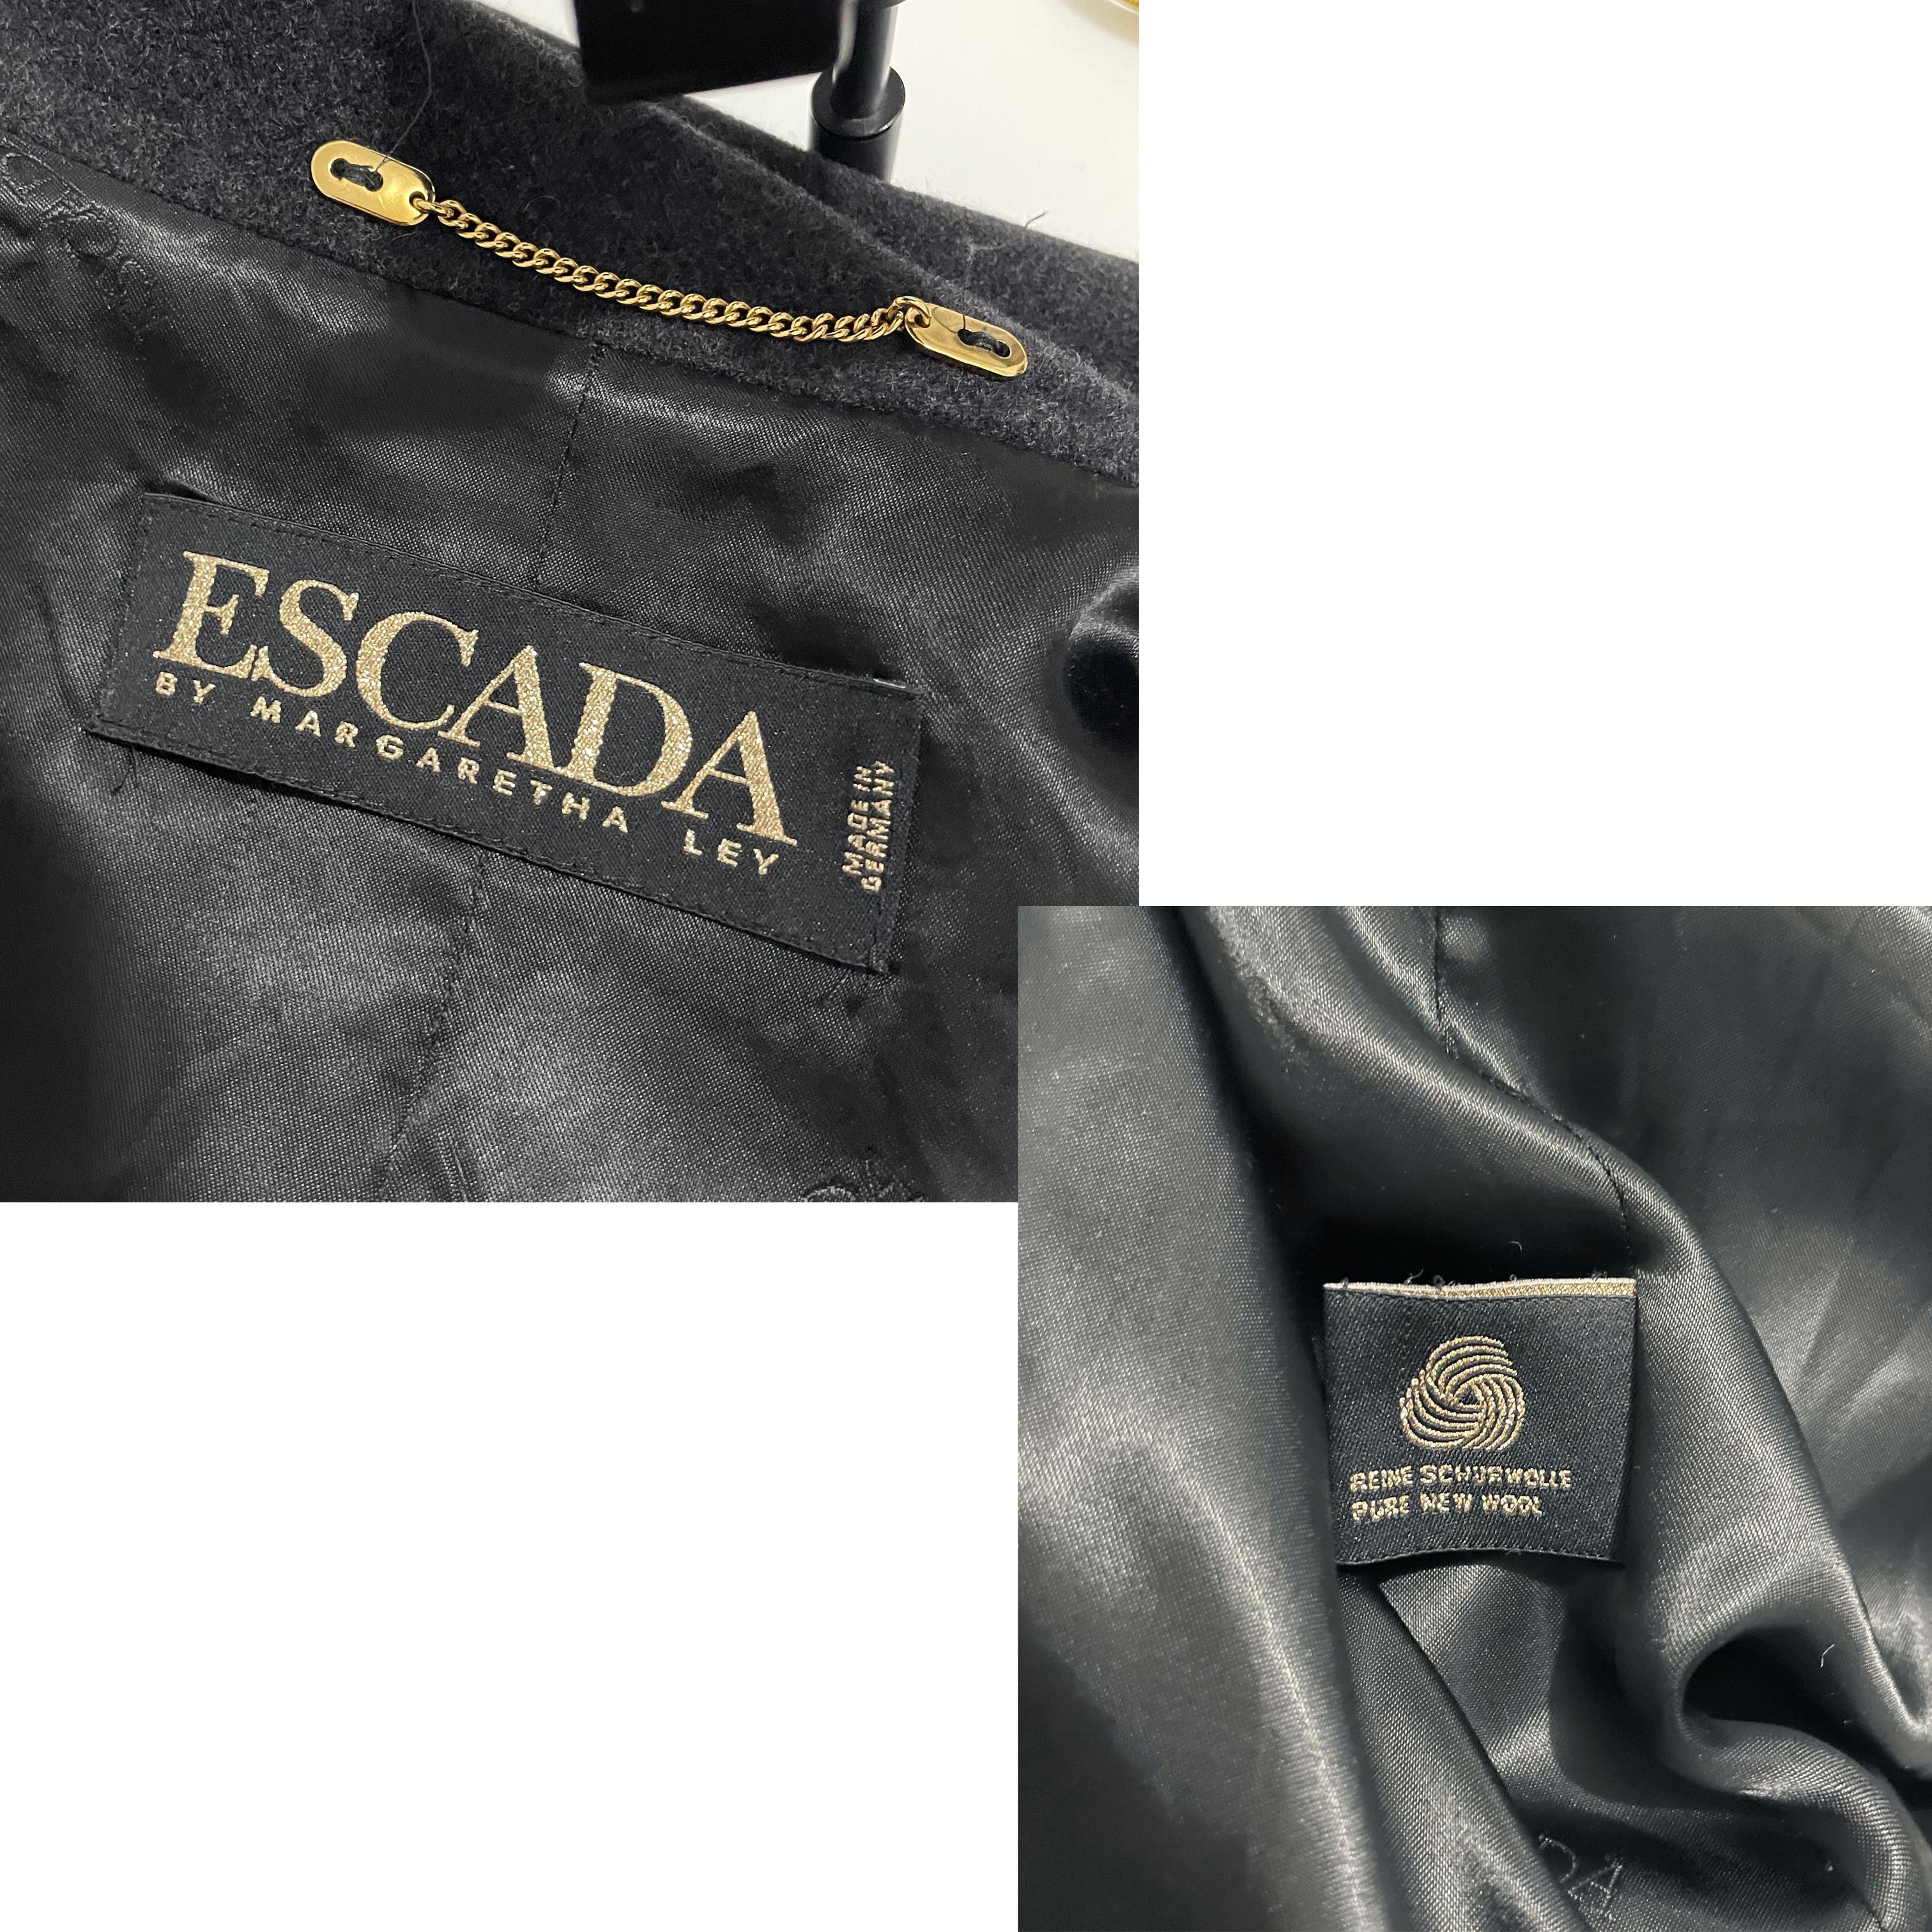 Escada Coat Double Breasted Charcoal Gray Pure New Wool Trench Style Vintage M/L 1